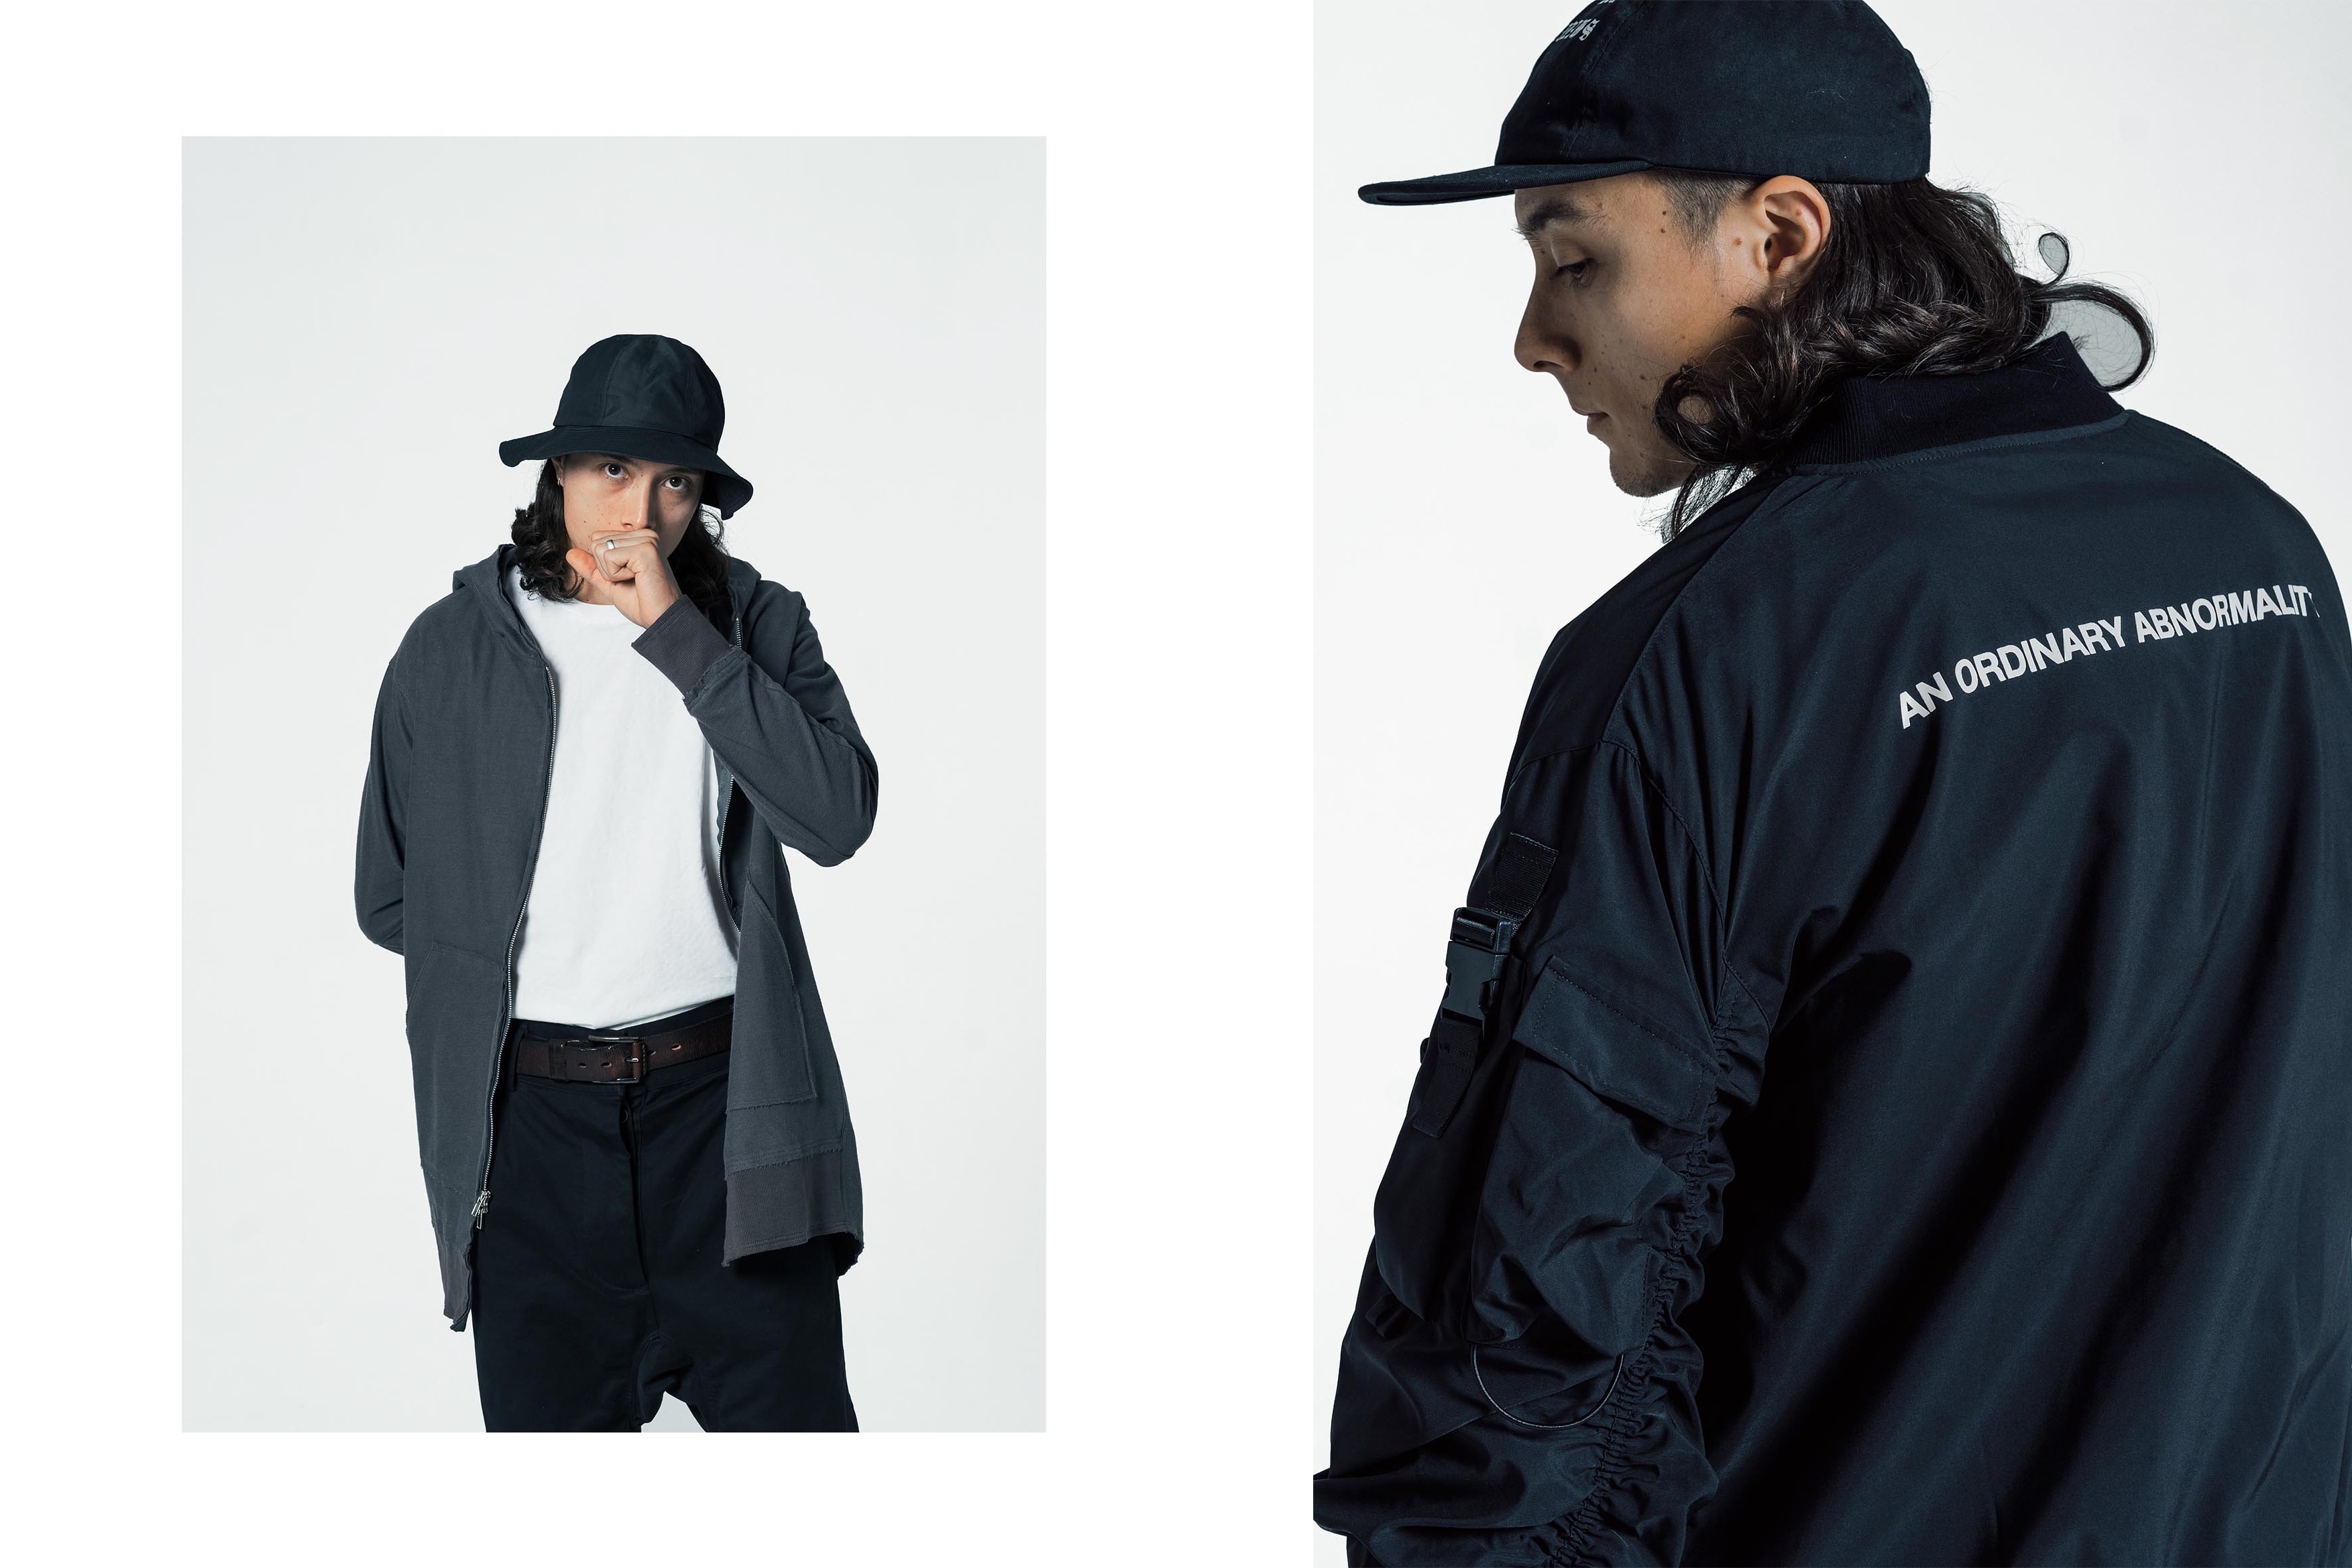 ATTEMPT 2016 Fall/Winter "The Man In A Case" Lookbook